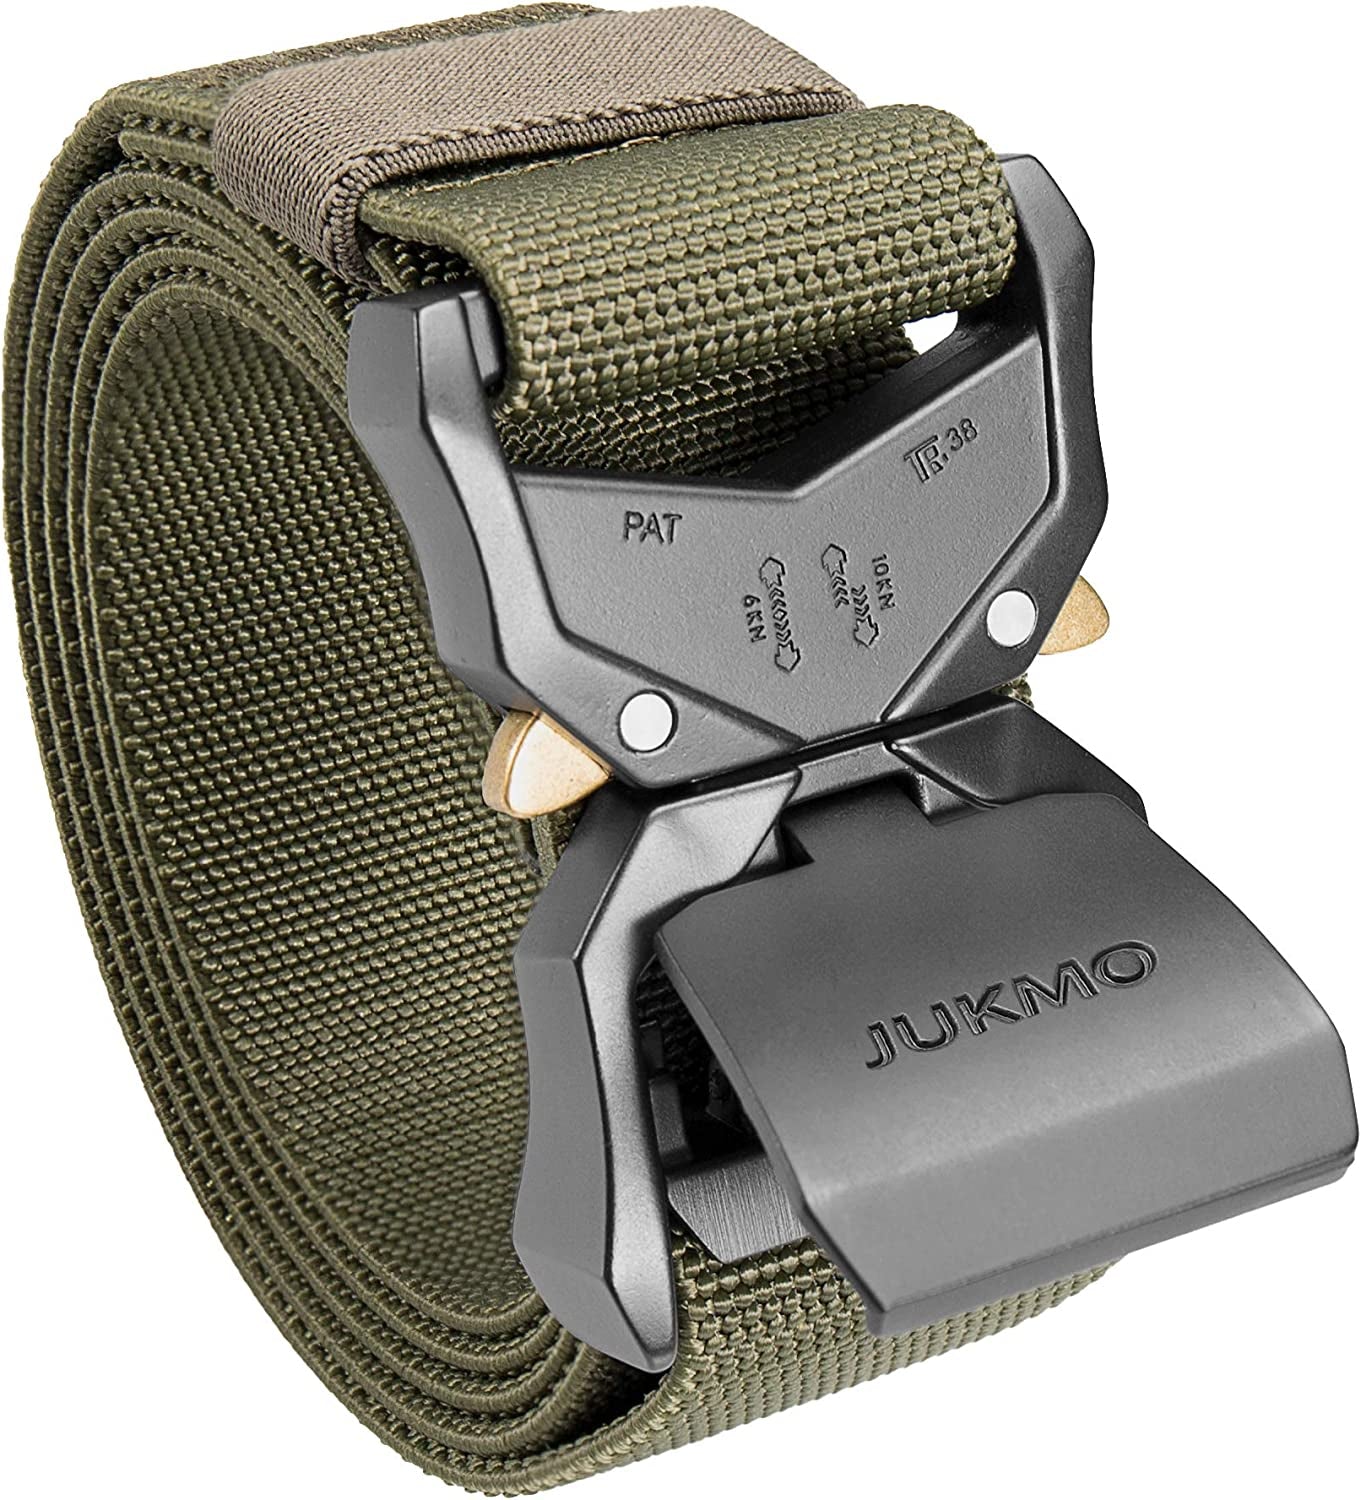 JUKMO Tactical Belt, Military Hiking Rigger 1.5" Nylon Web Work Belt with Heavy Duty Quick Release Buckle